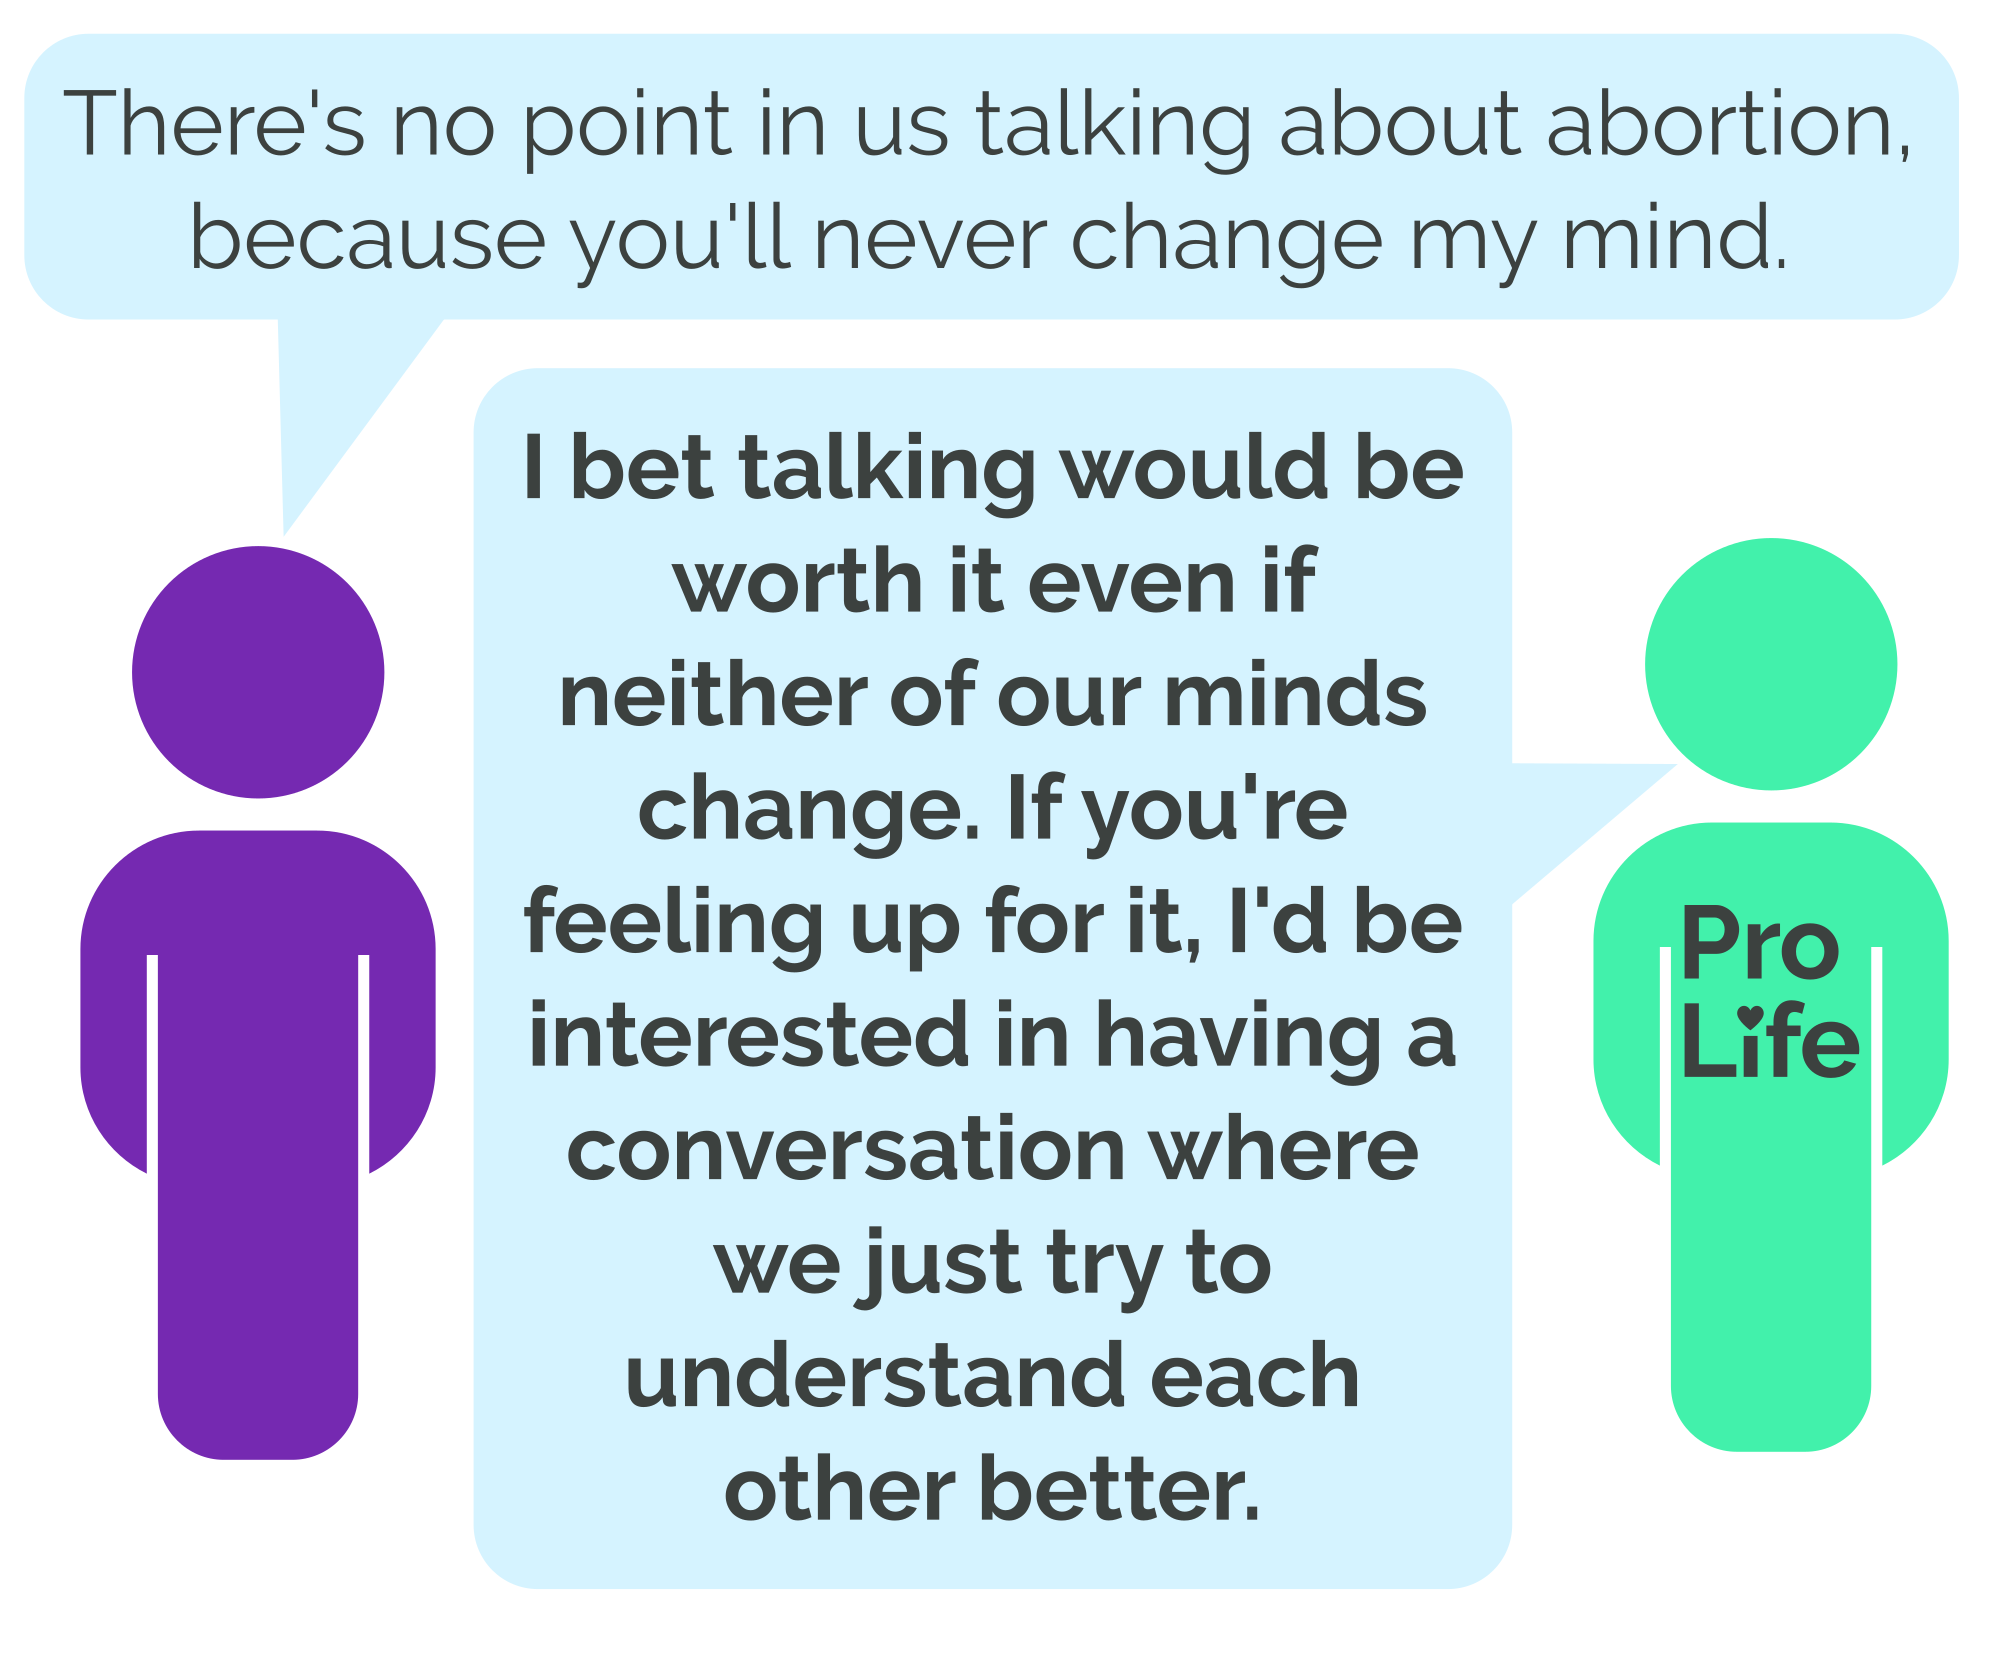 Person 1: There’s no point in us talking about abortion, because you’ll never change my mind. Person 2 (our hero): I bet talking would be worth it even if neither of our minds change. If you’re feeling up for it, I’d be interested in having a conversation where we just try to understand each other better.